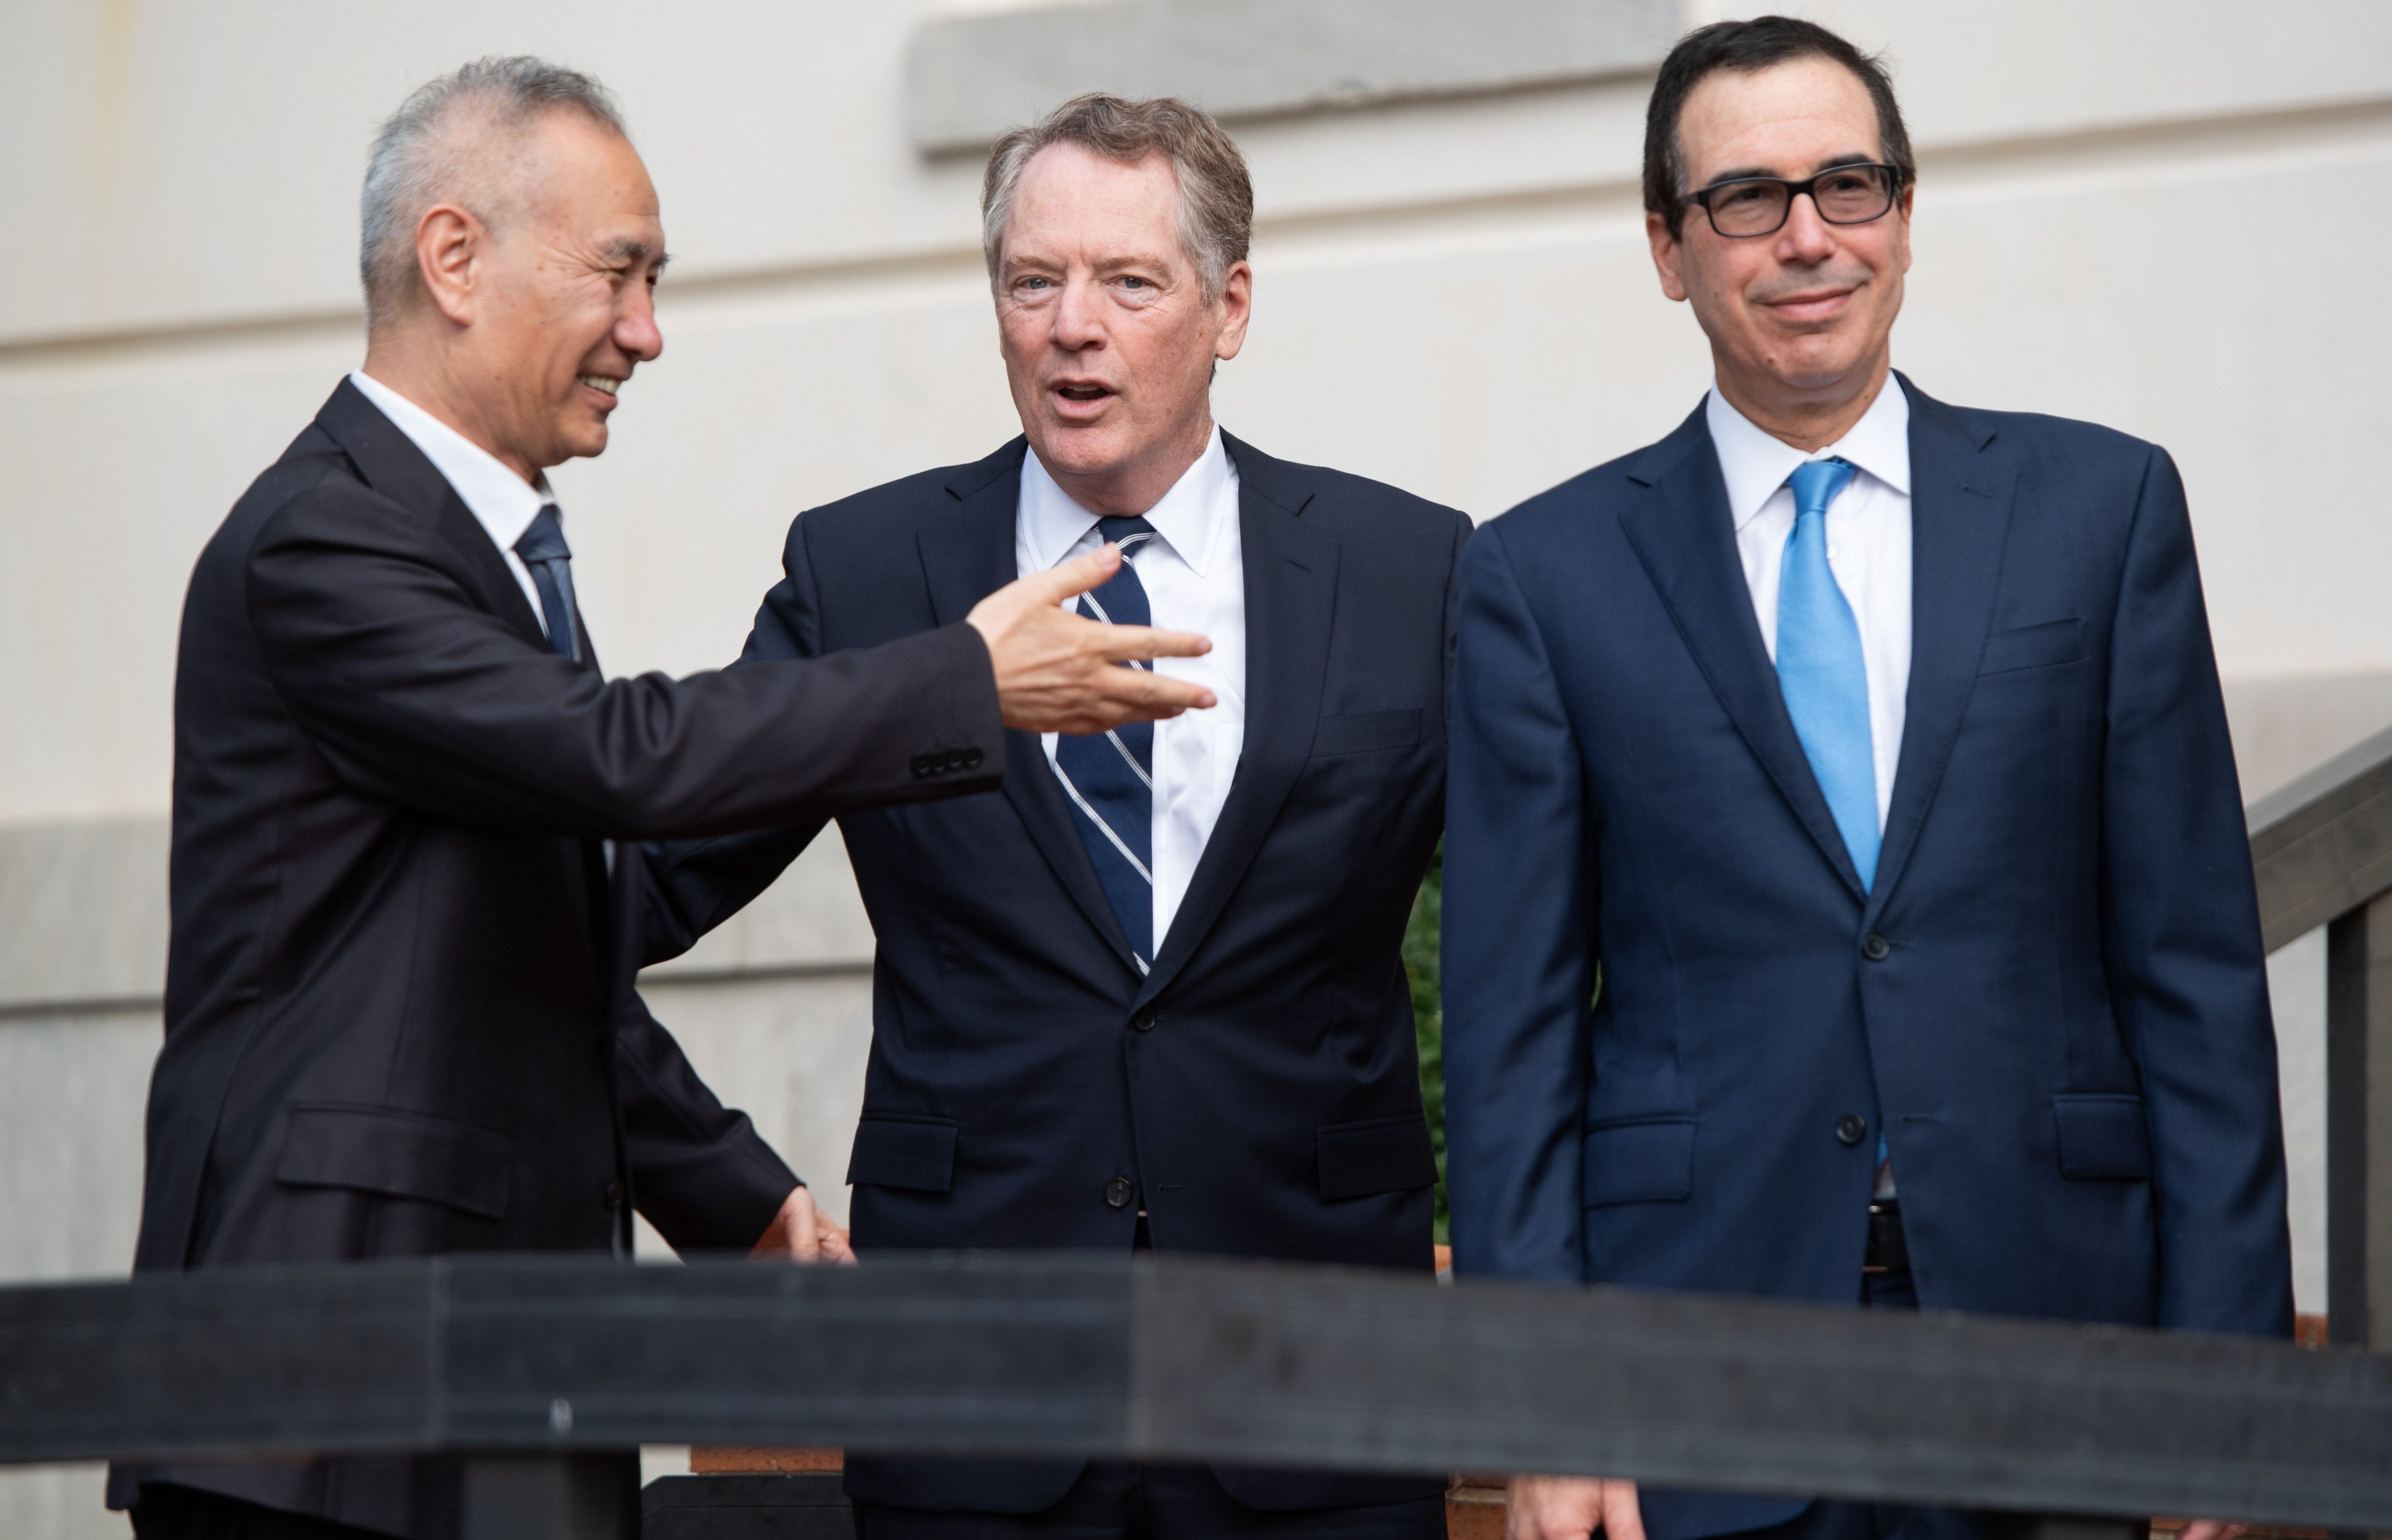  US Treasury Secretary Steven Mnuchin (R) and US Trade Representative Robert Lighthizer (C) greet Chinese Vice Premier Liu He as he arrives for trade talks at the Office of the US Trade Representative in Washington. (AFP Photo)